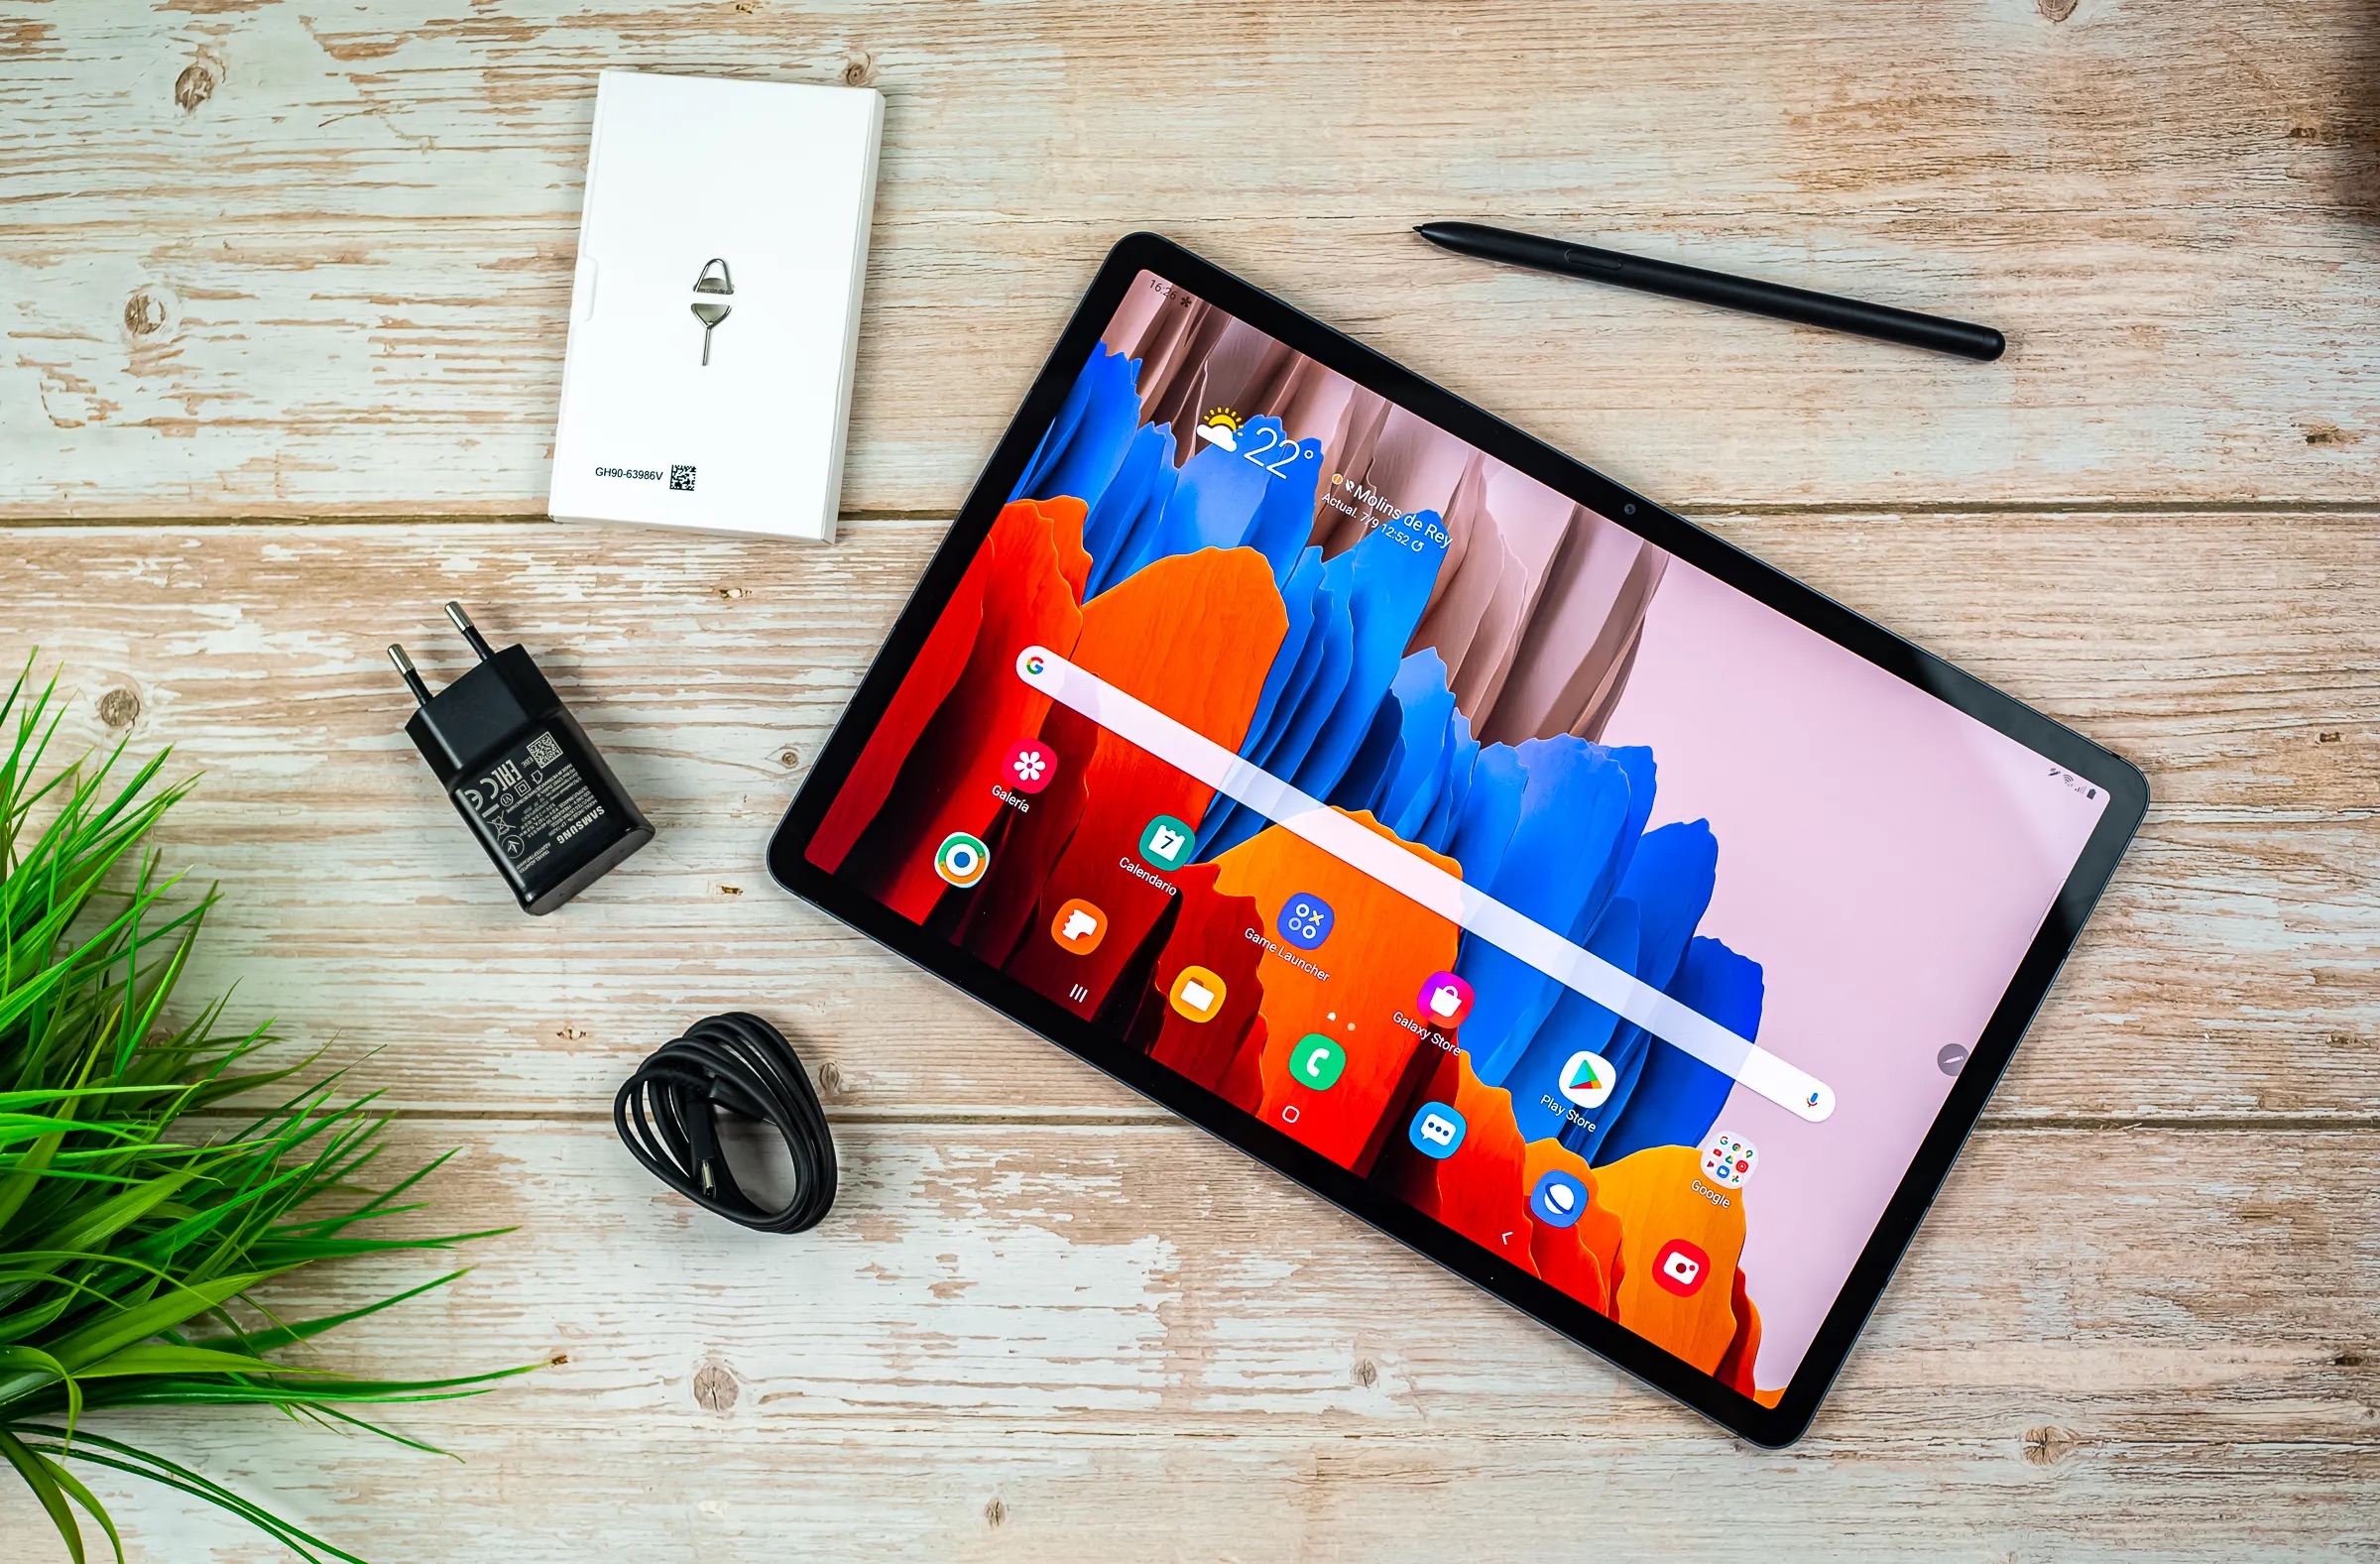 Samsung Galaxy Tab A7 Lite Review - An Affordable Entertainment Tablet